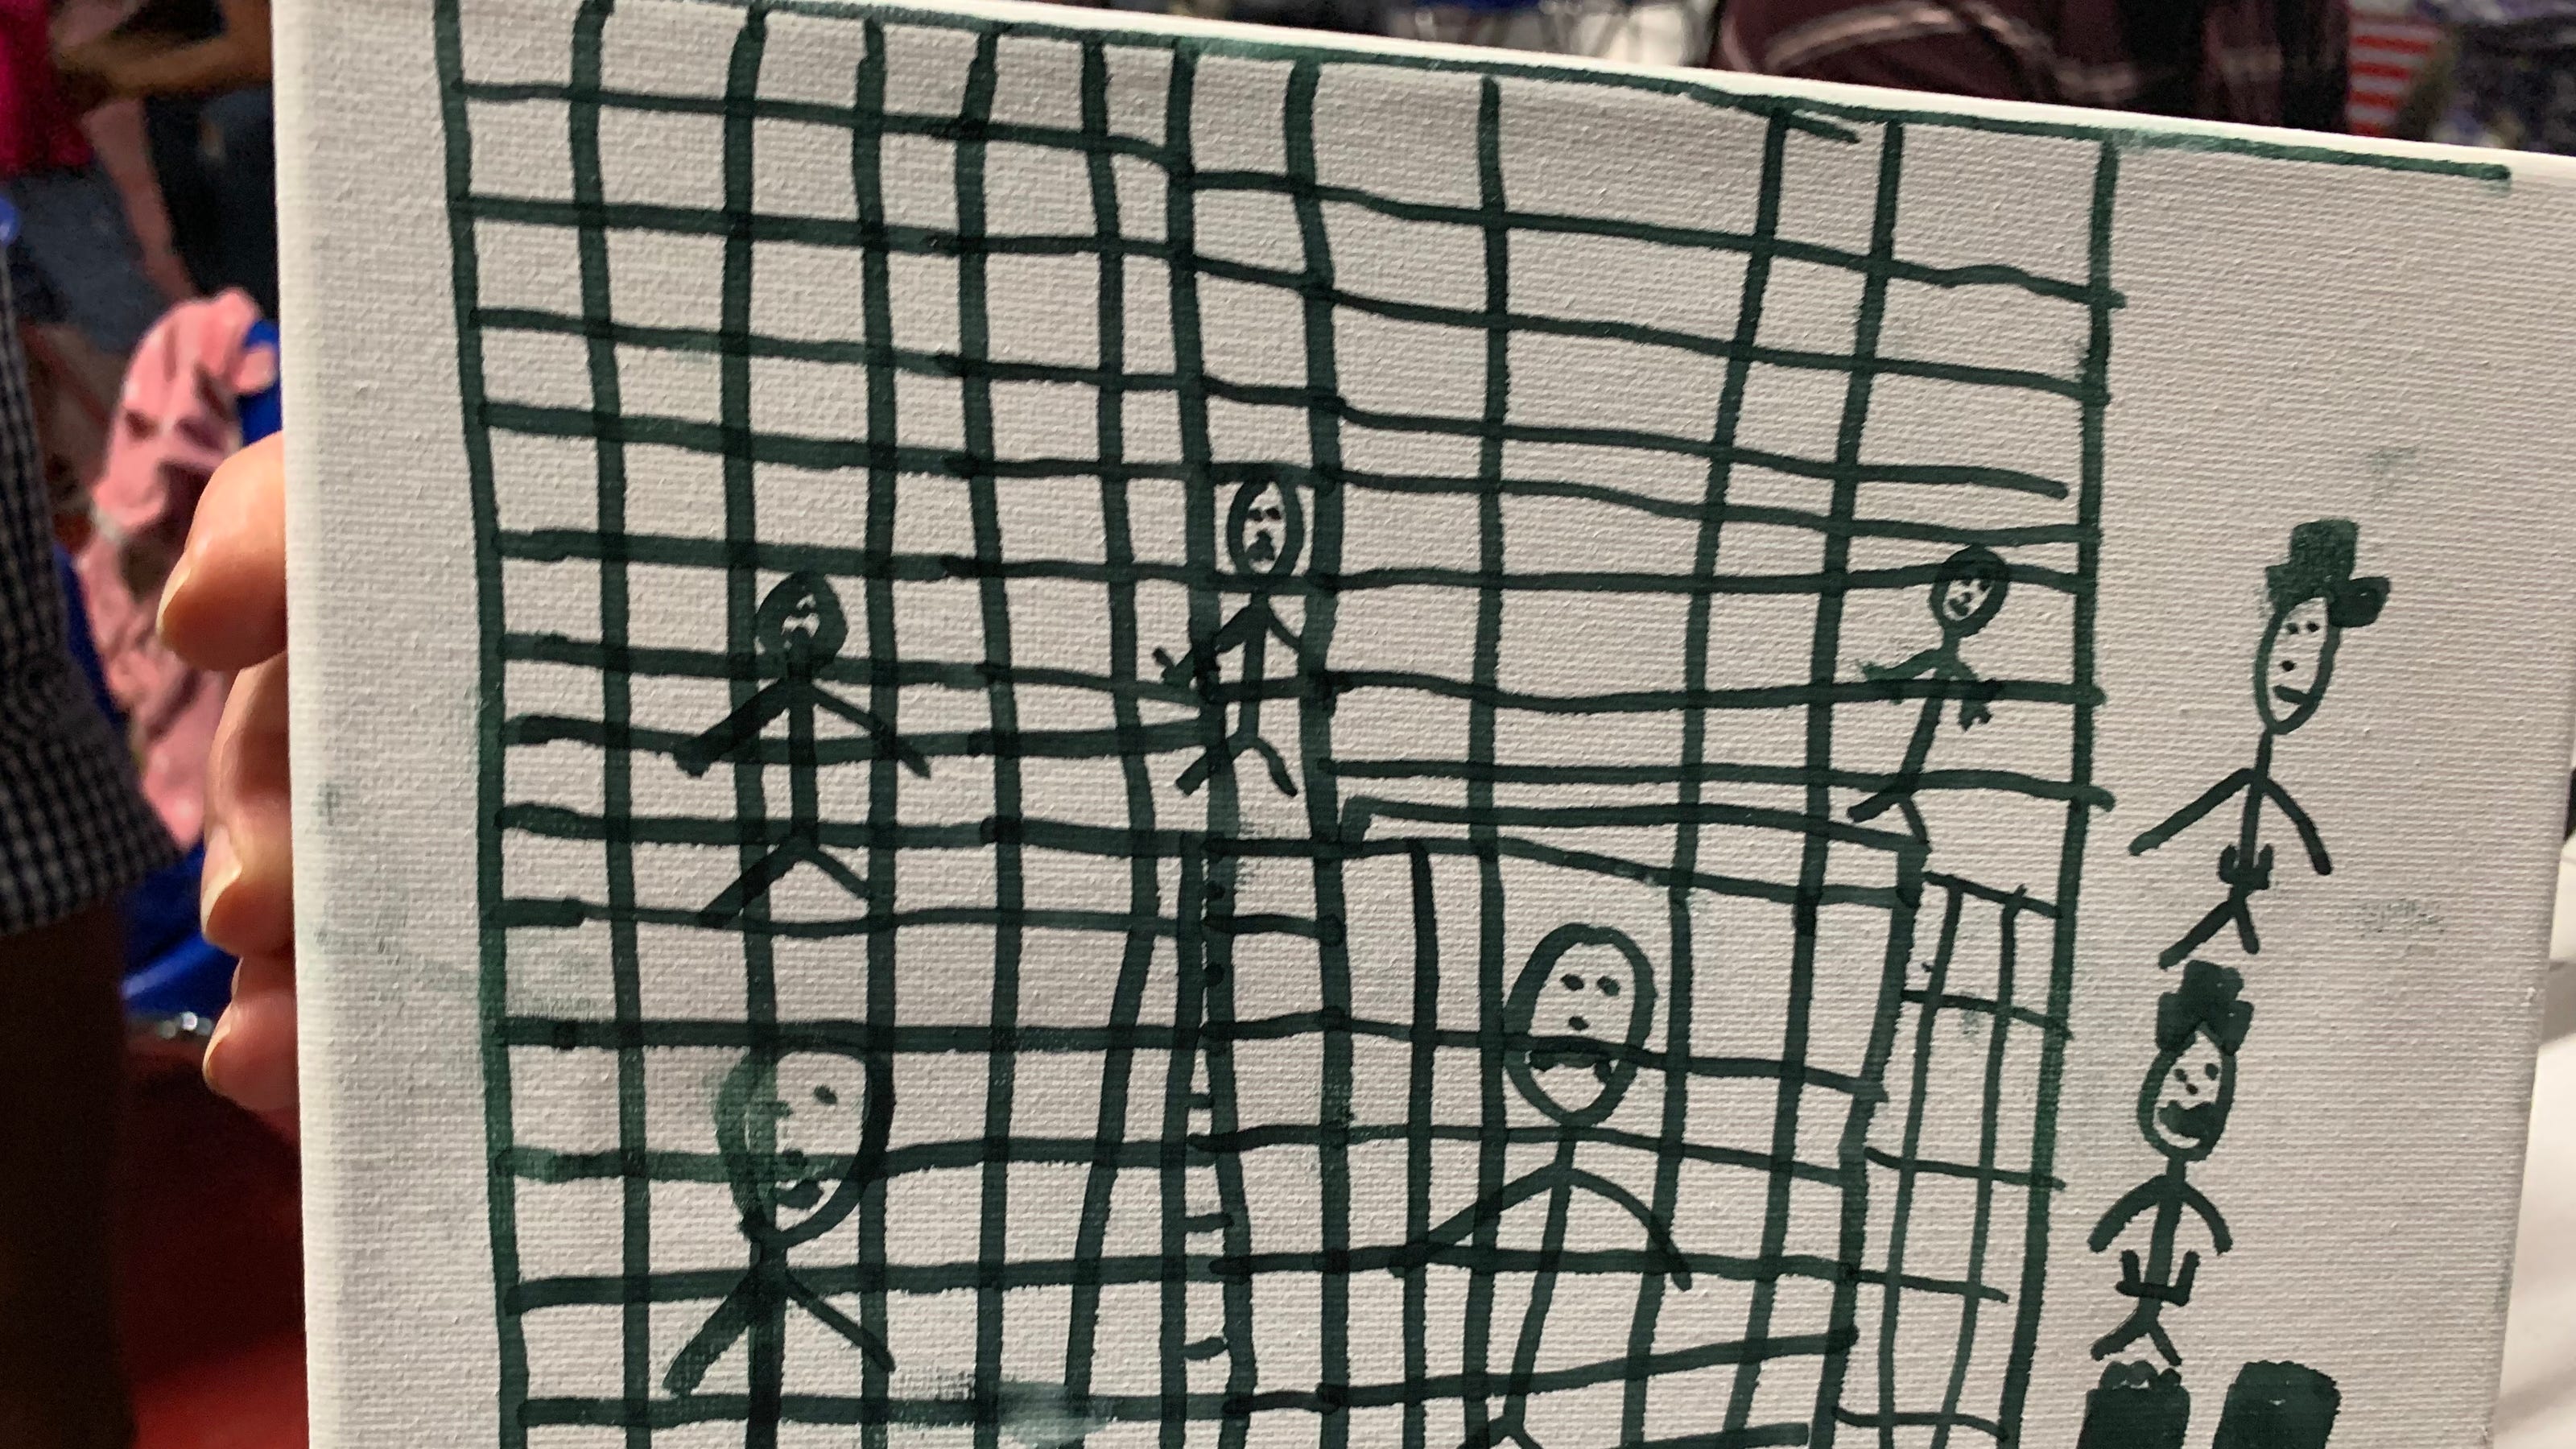 Doctors share migrant children's haunting drawings: 'These children coming into our country need a voice'